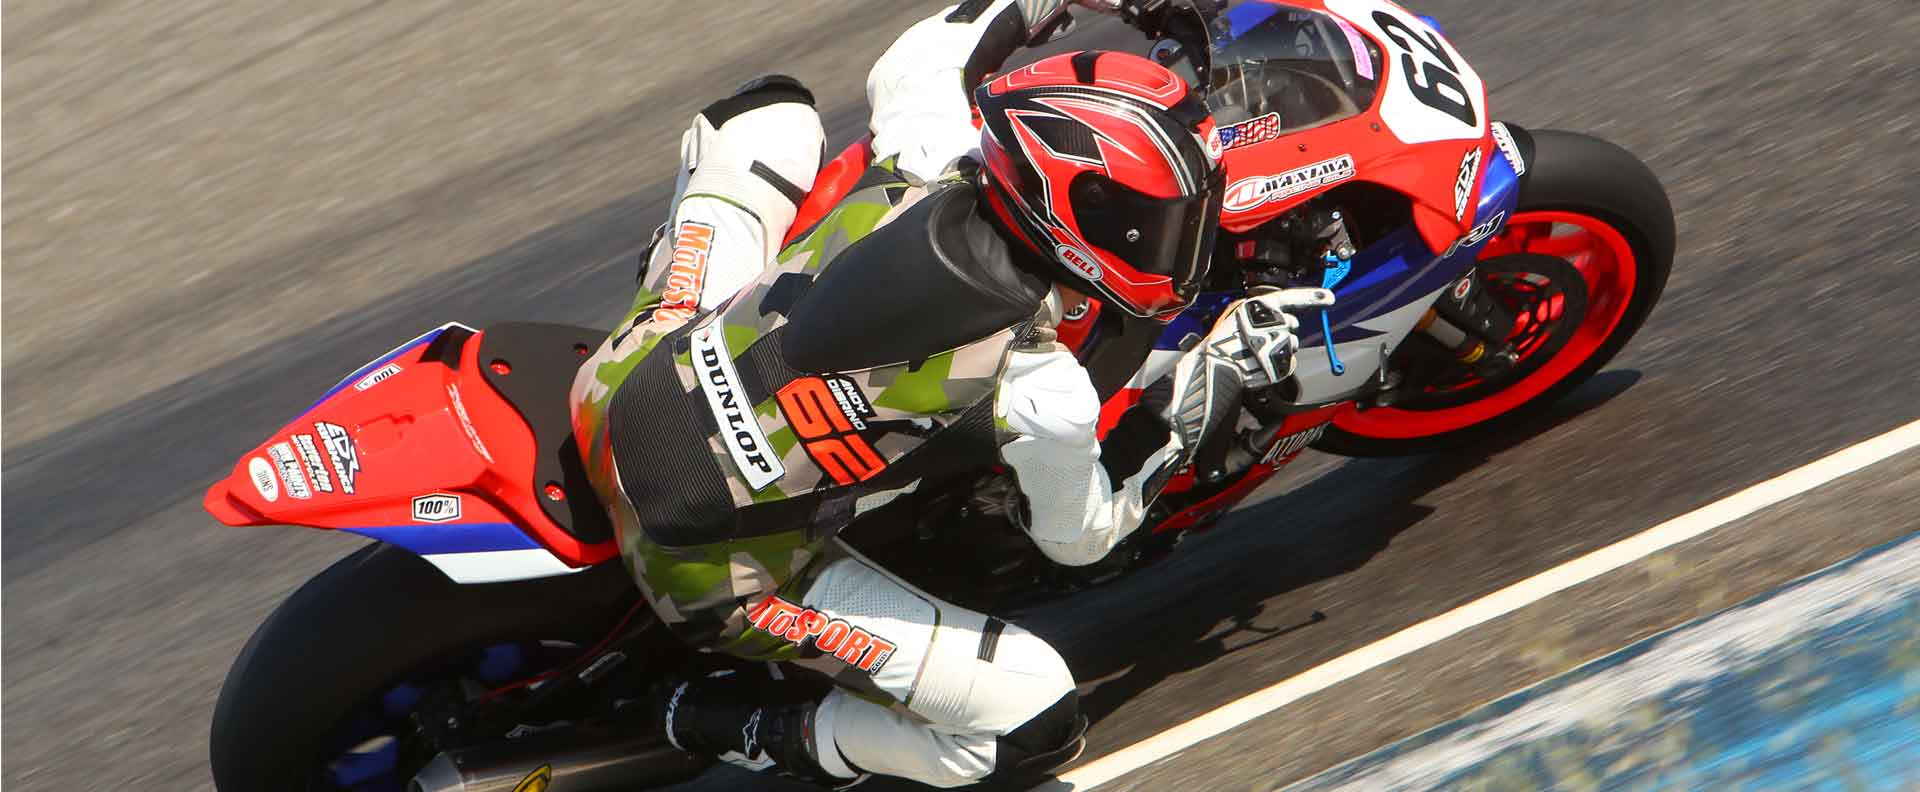 Andy riding his new R1 at Thunderhill raceway in practice for Oregon motorcycle road racing